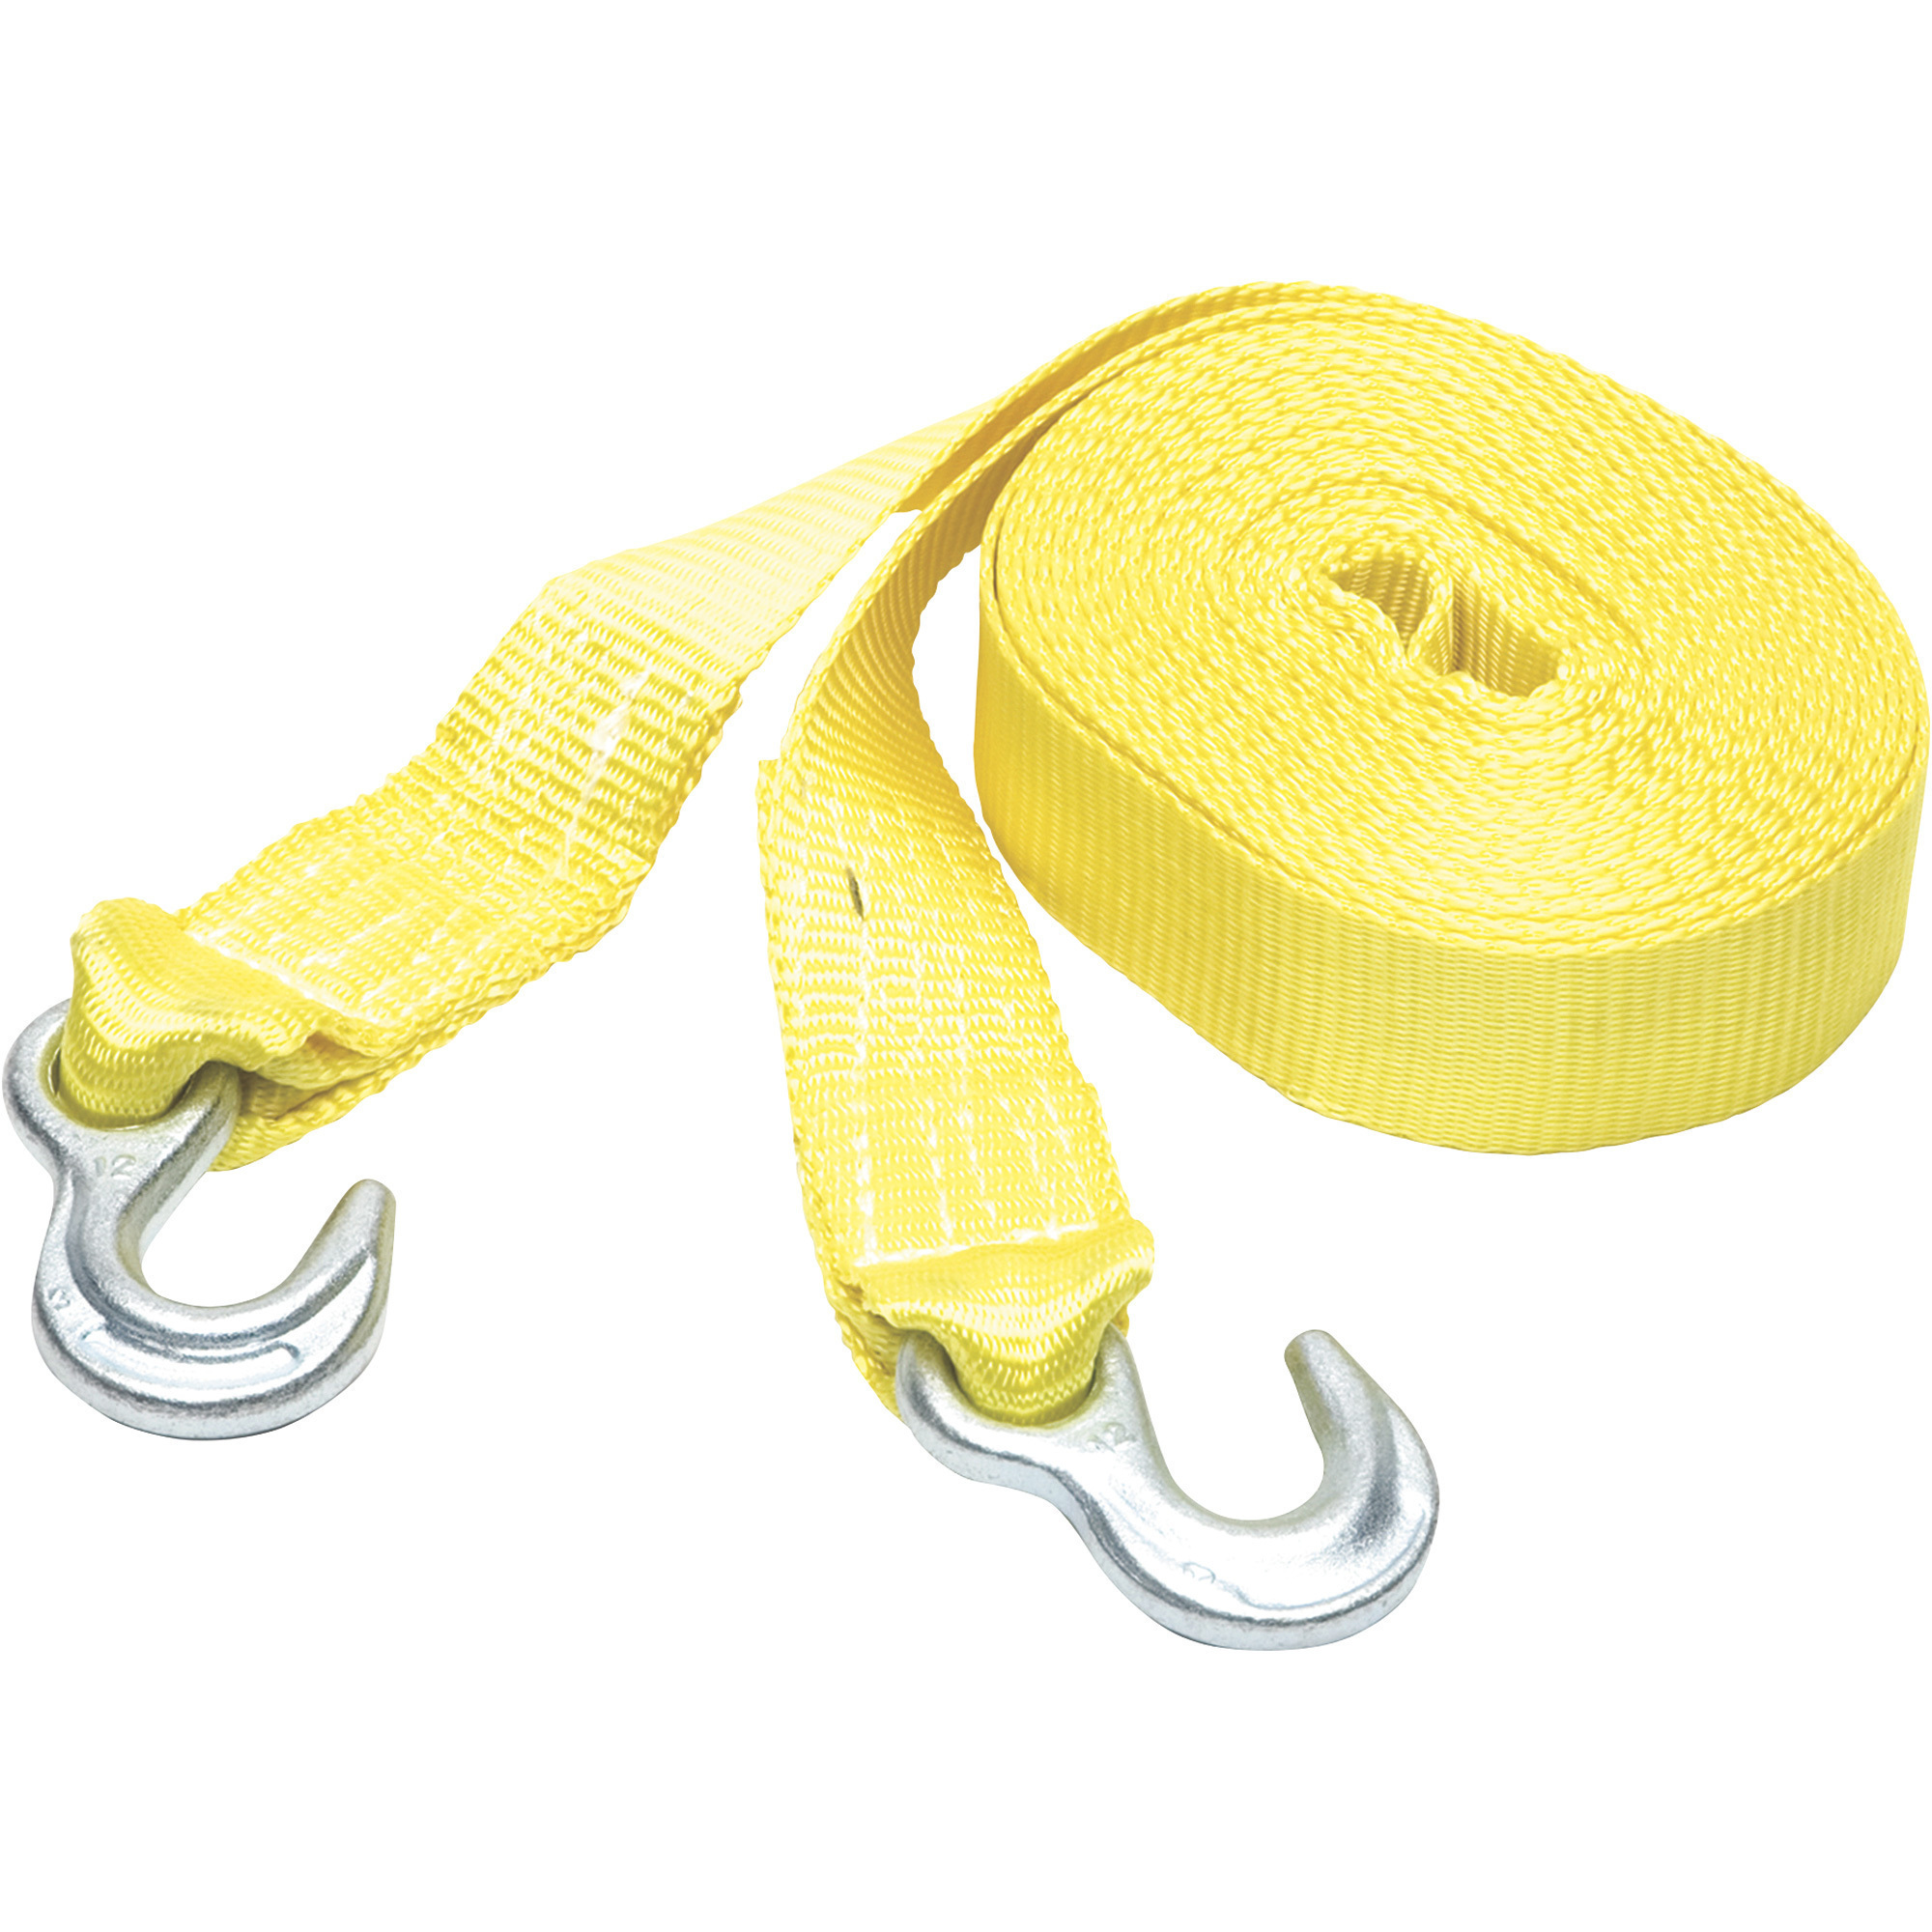 SmartStraps Heavy-Duty Tow Strap with Hooks, 20ft.L, 9,000-Lb. Breaking Strength, Yellow, Model 131